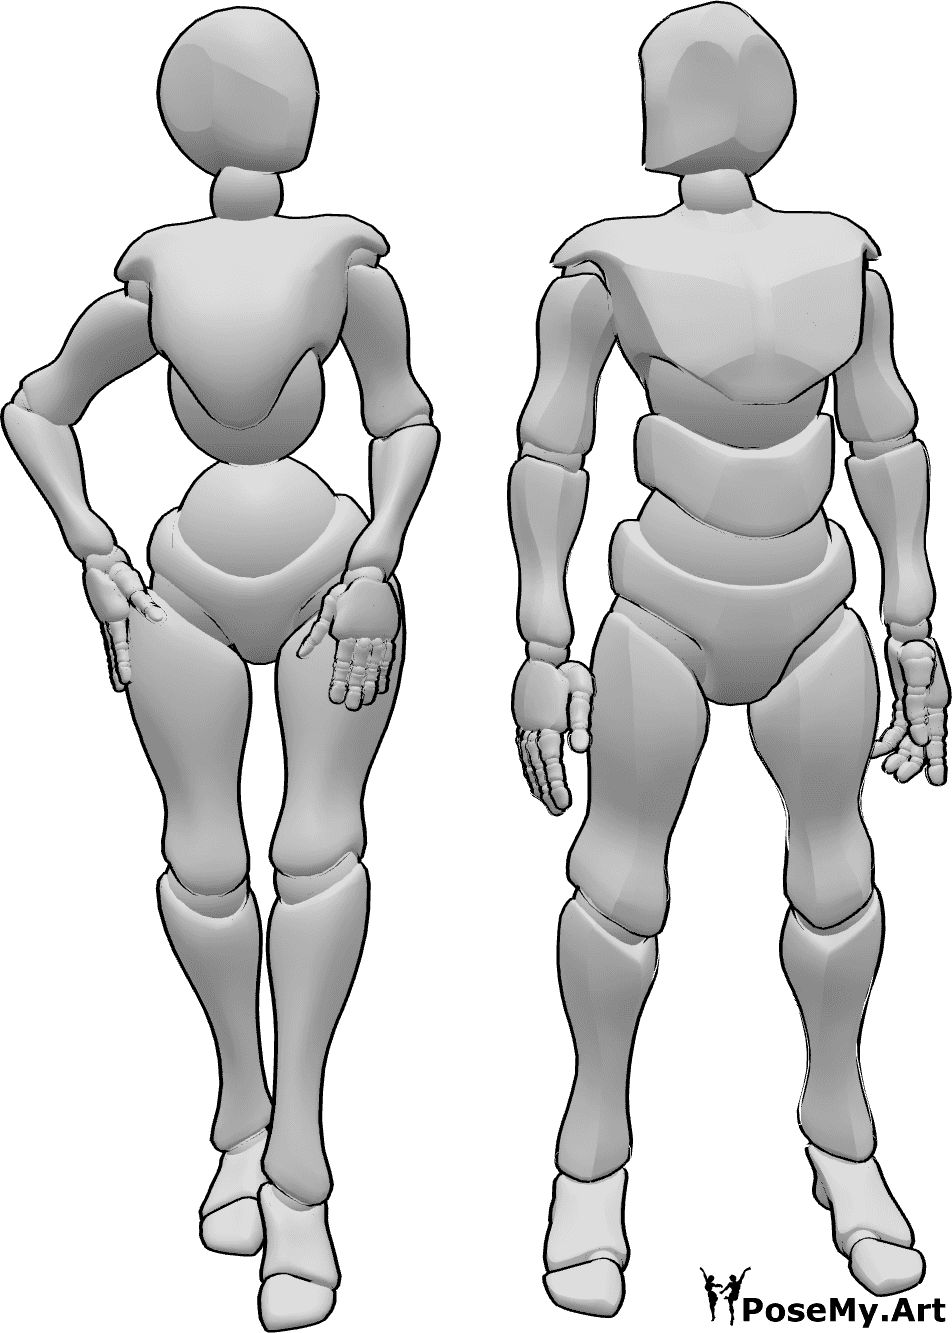 57 Standing reference ideas | model poses, figure poses, human poses  reference